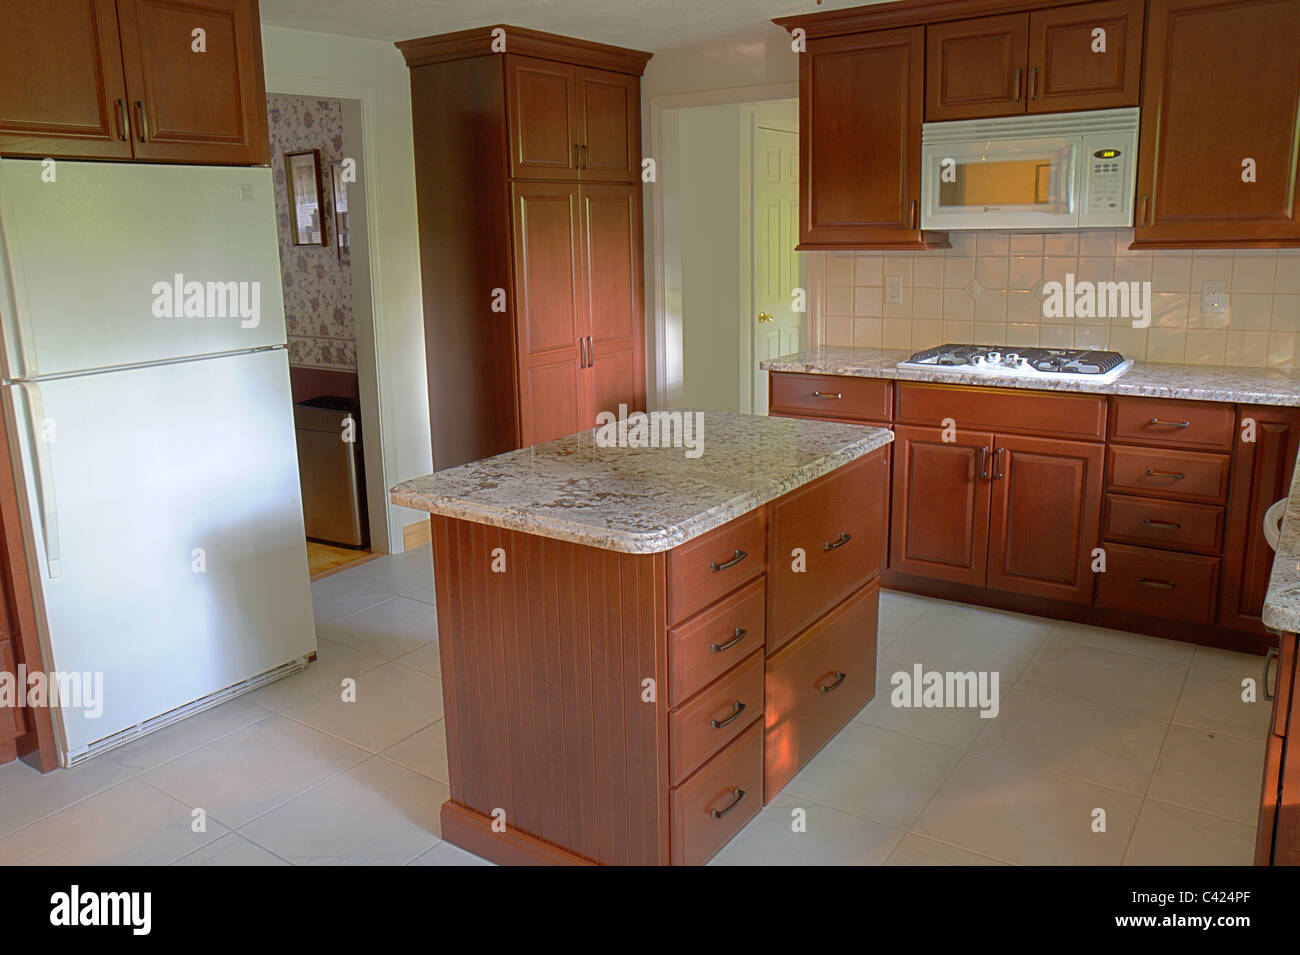 New Cherry Cabinets Granite Counter Tops And Ceramic Tile Floor